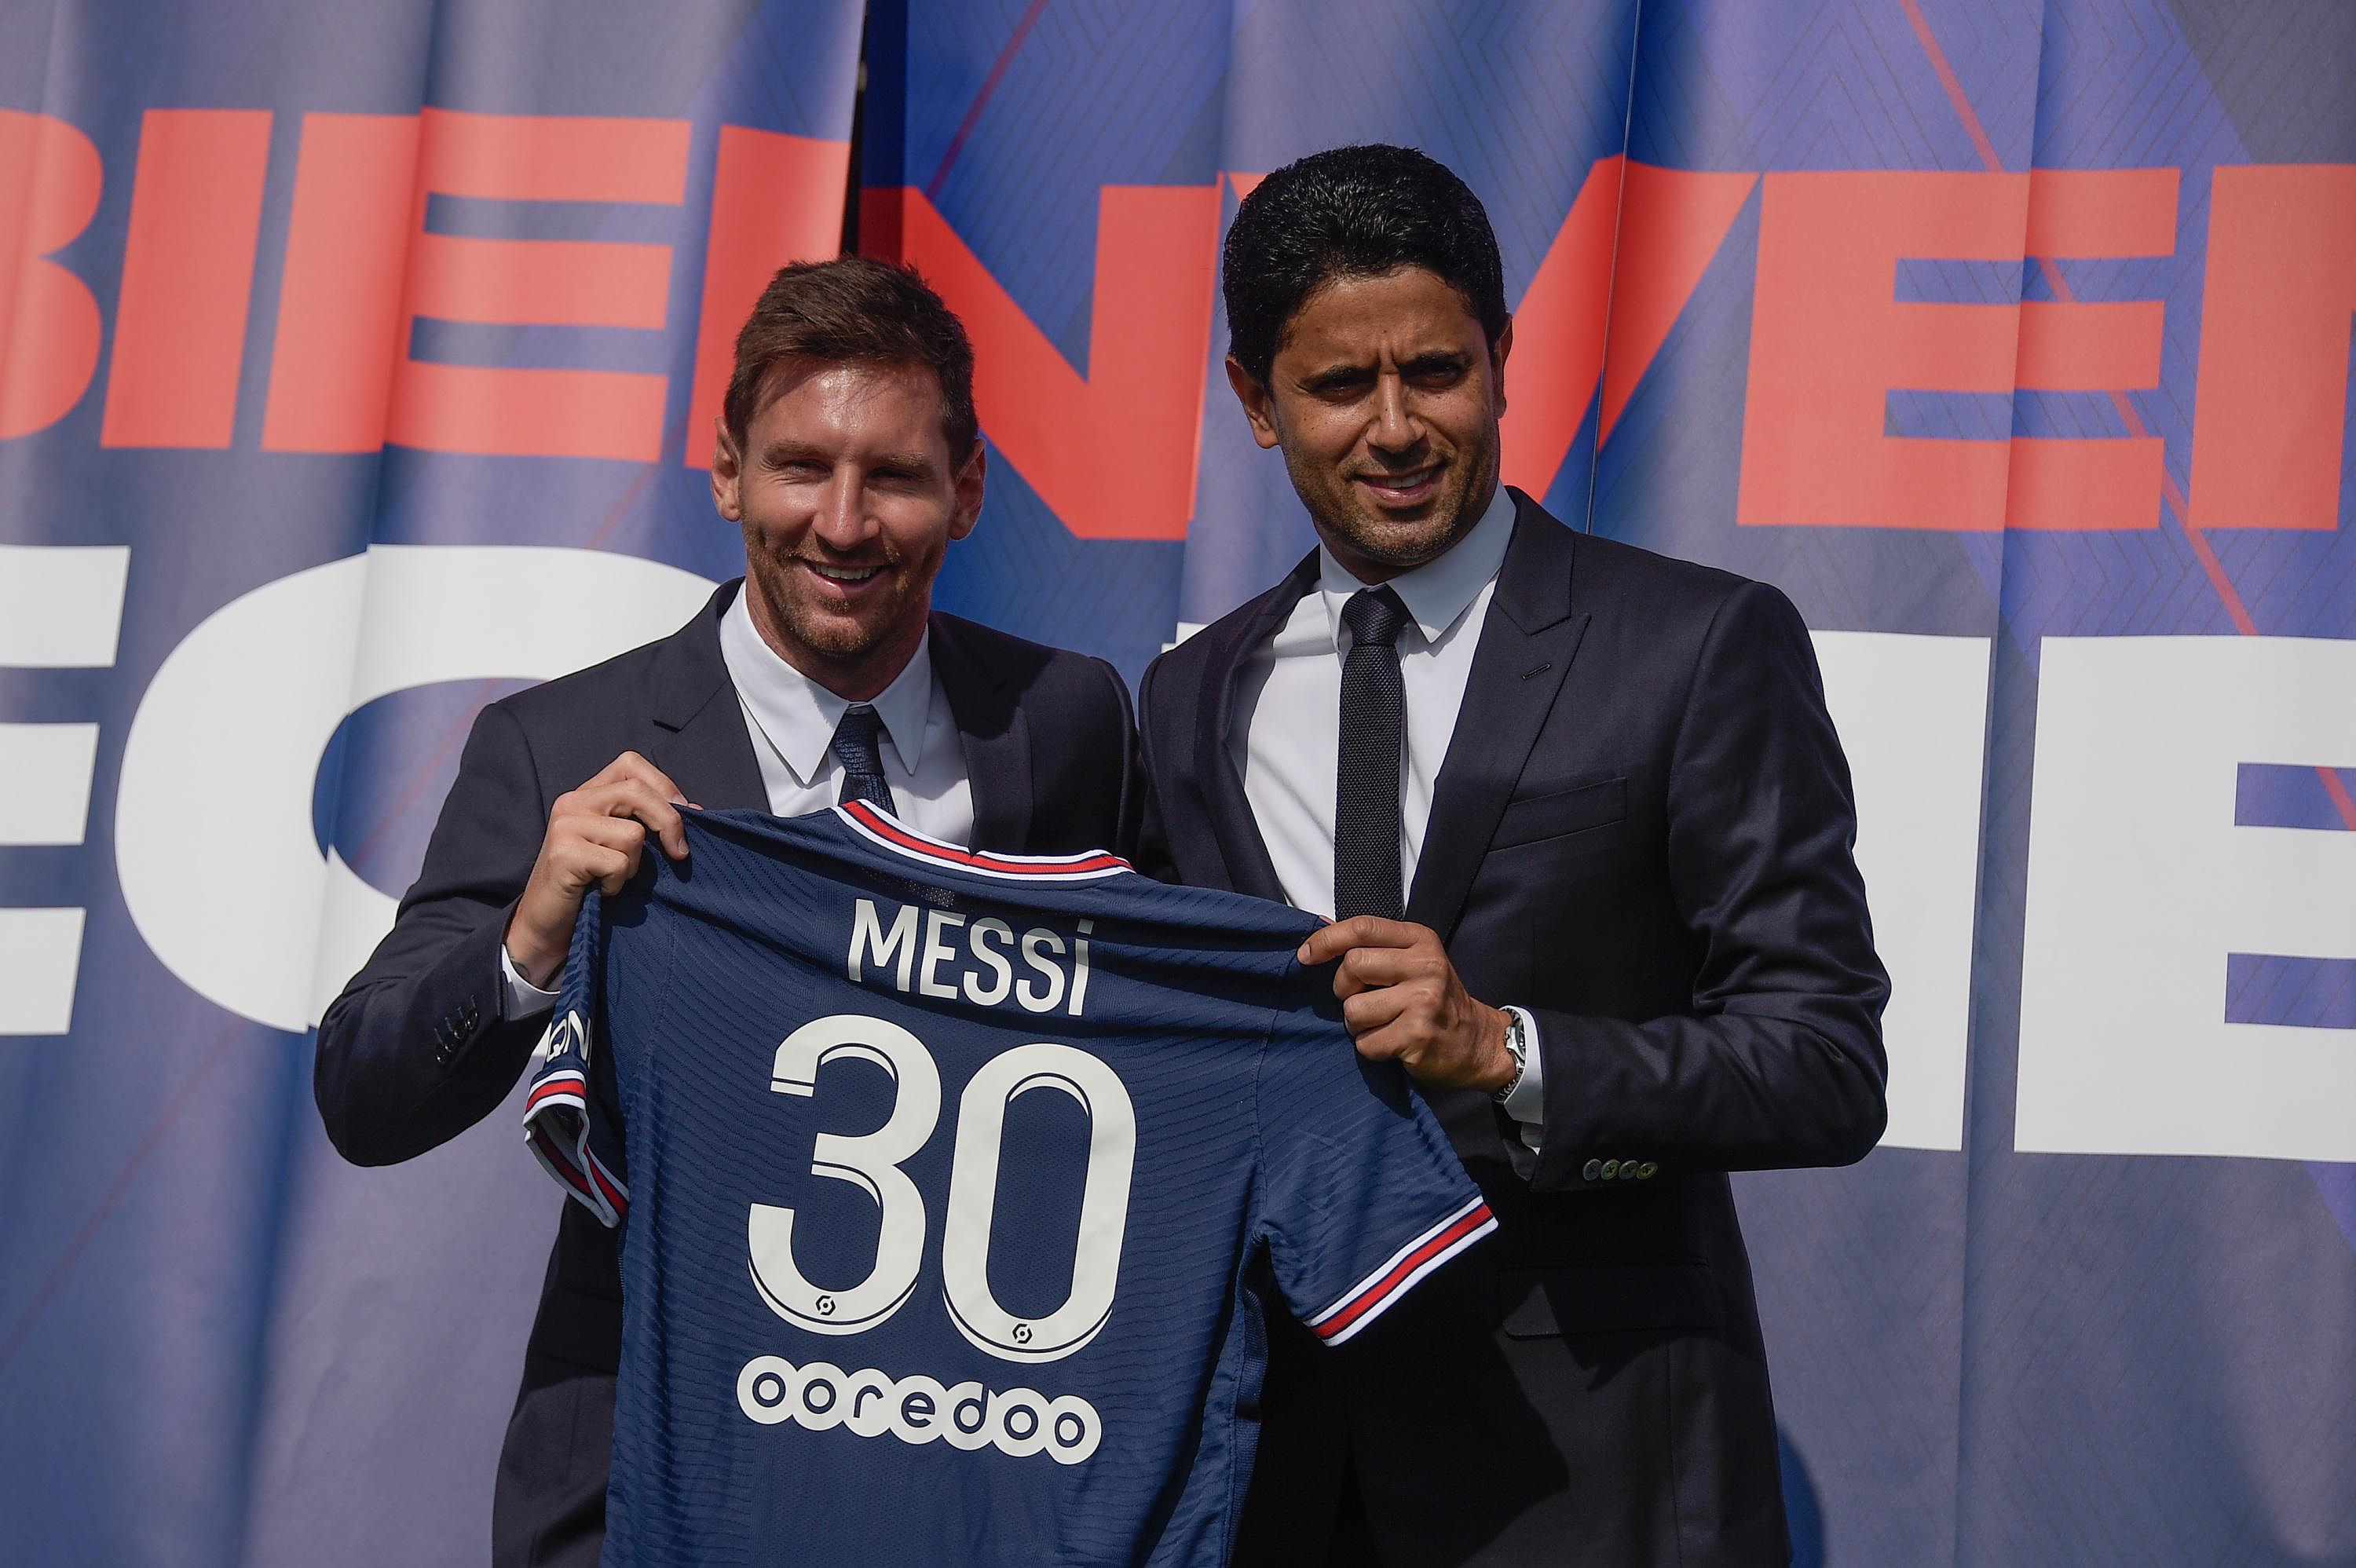 Al-Khelaïfi responds to Messi after his criticism of his years at PSG: “It’s not respectful”